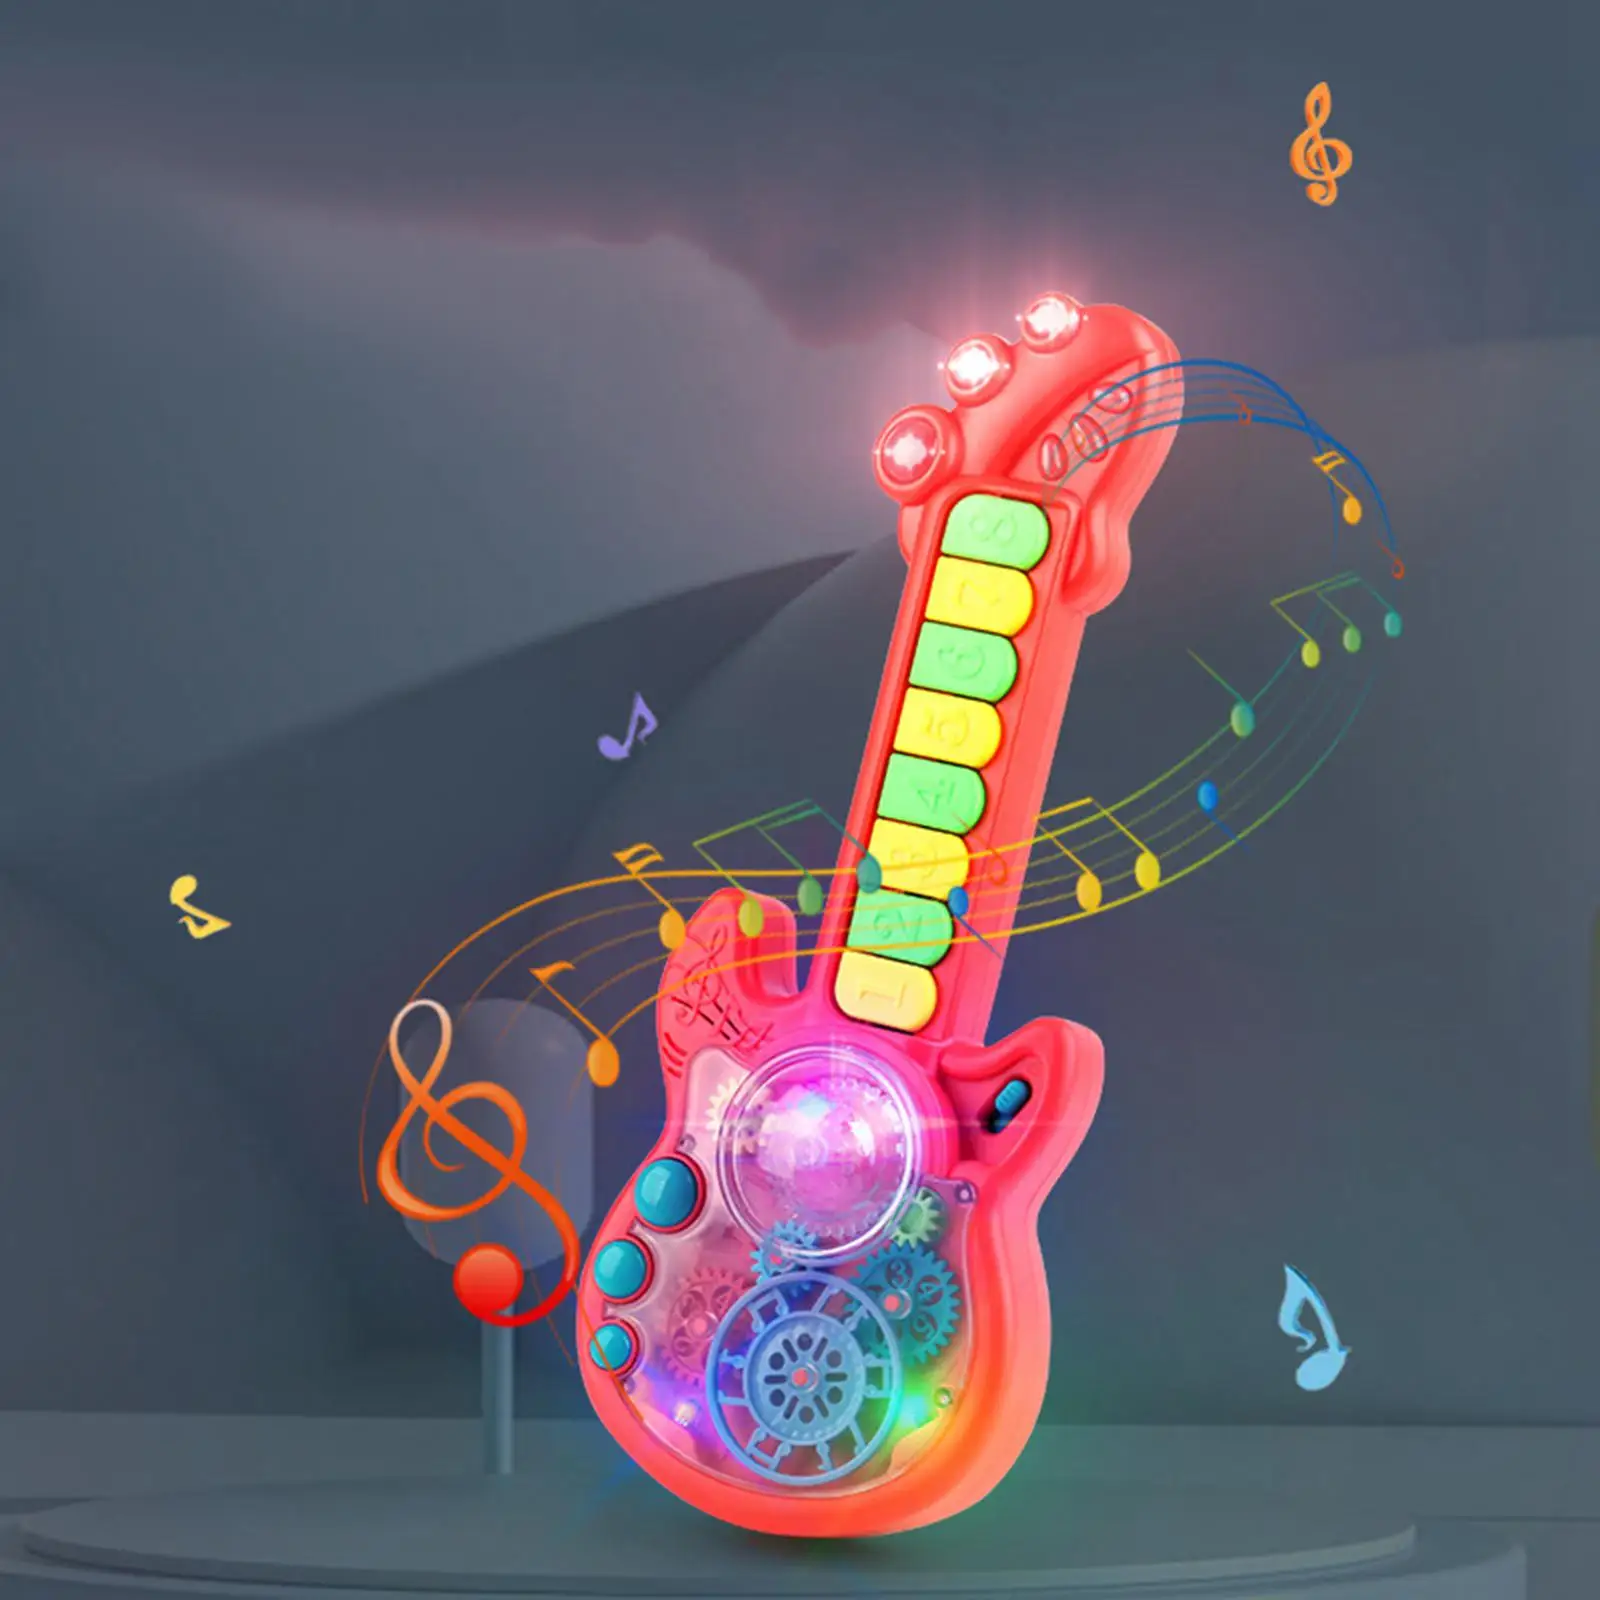 Eight Key Switches ,Guitar Electronic Musical Toy, Soft Music ,with Lanyard Educational for Birthday